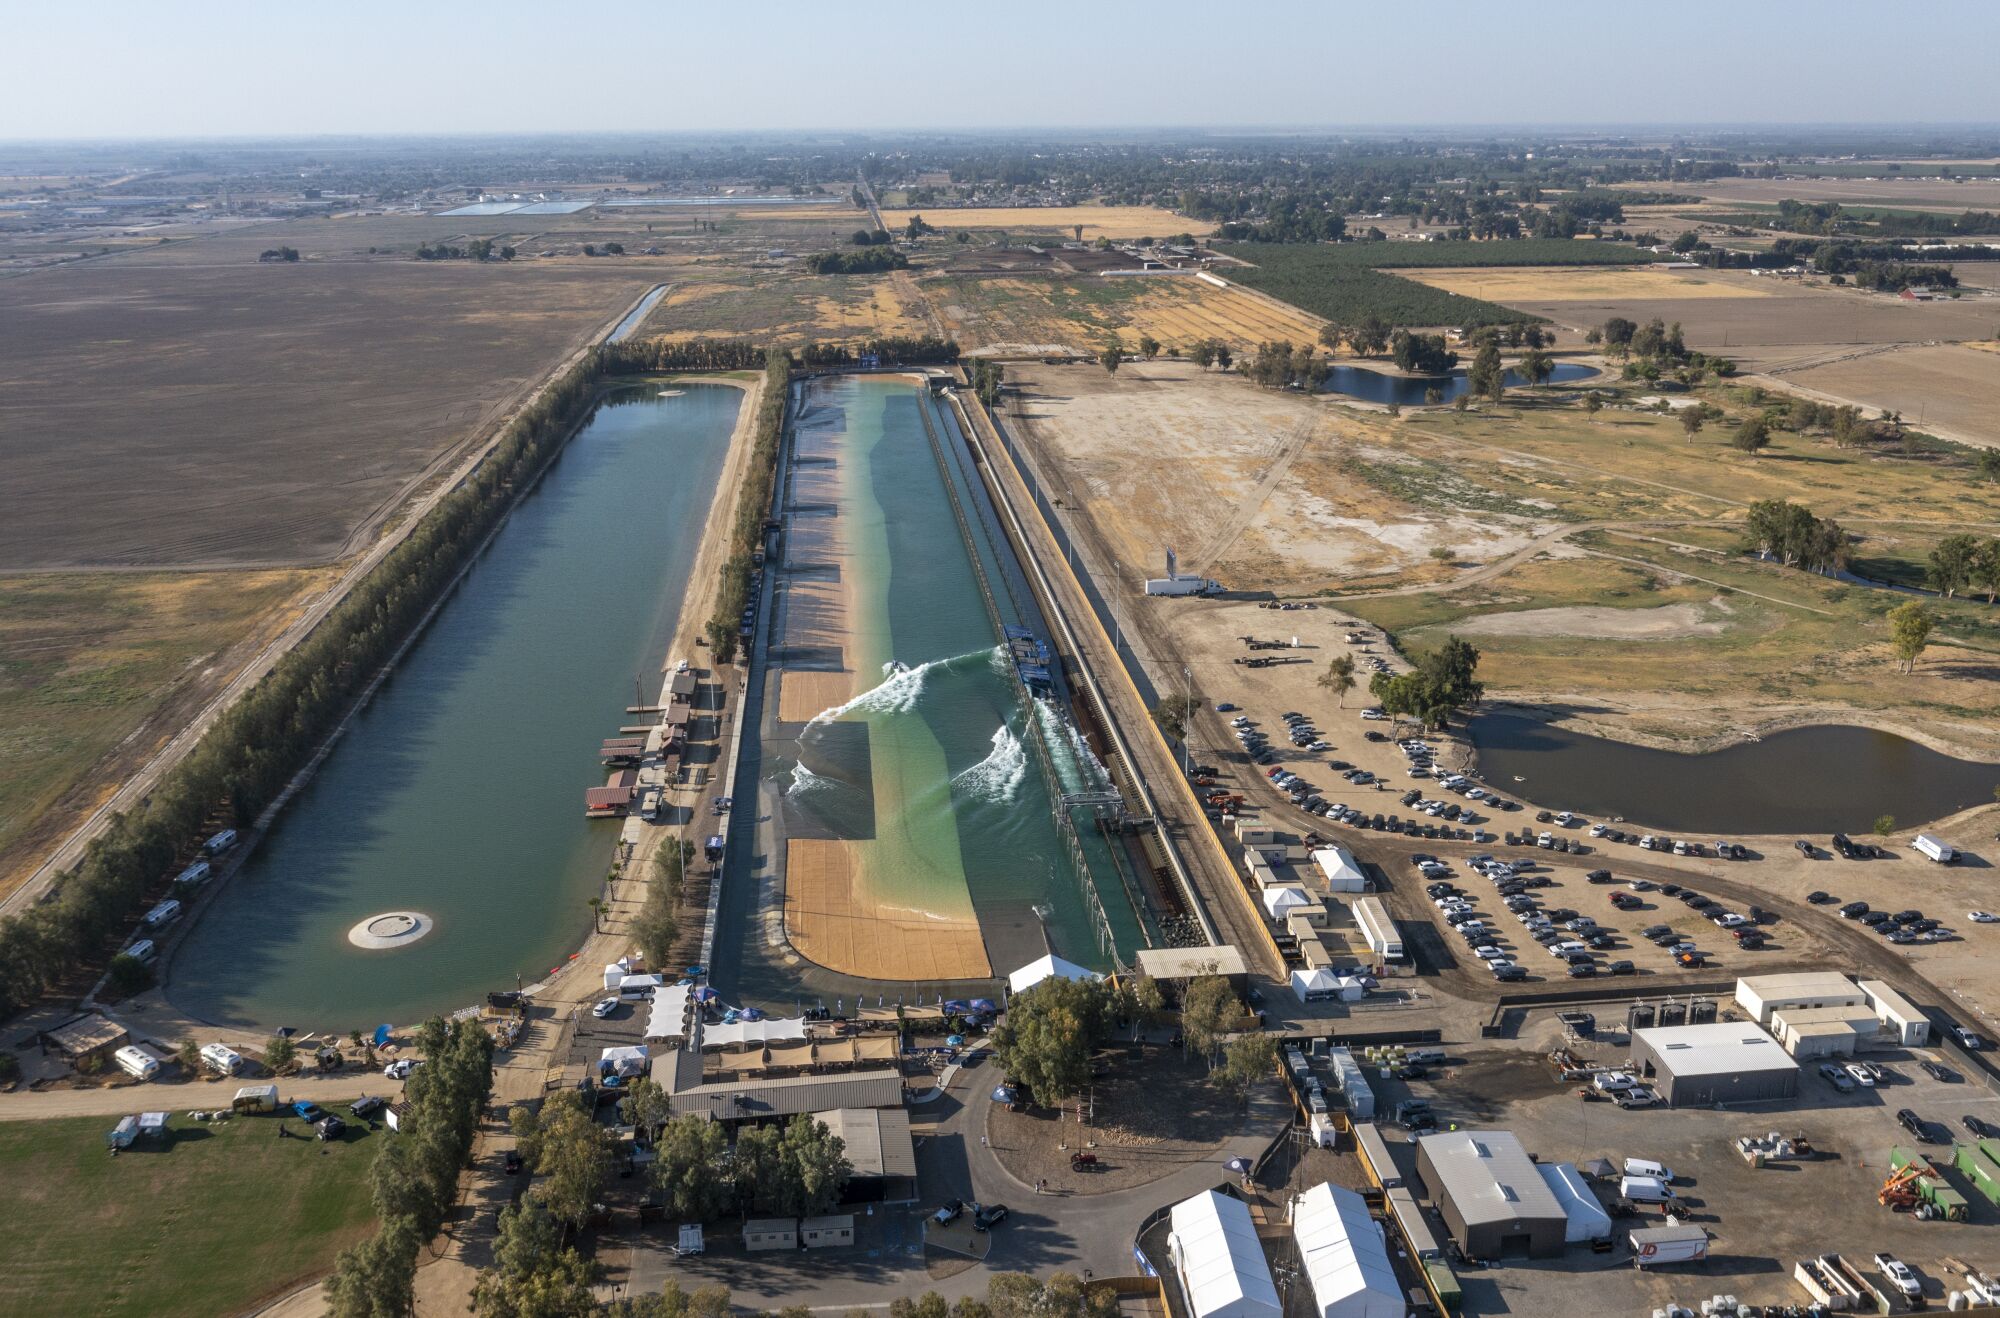 A look at Kelly Slater's Surf Ranch from the sky